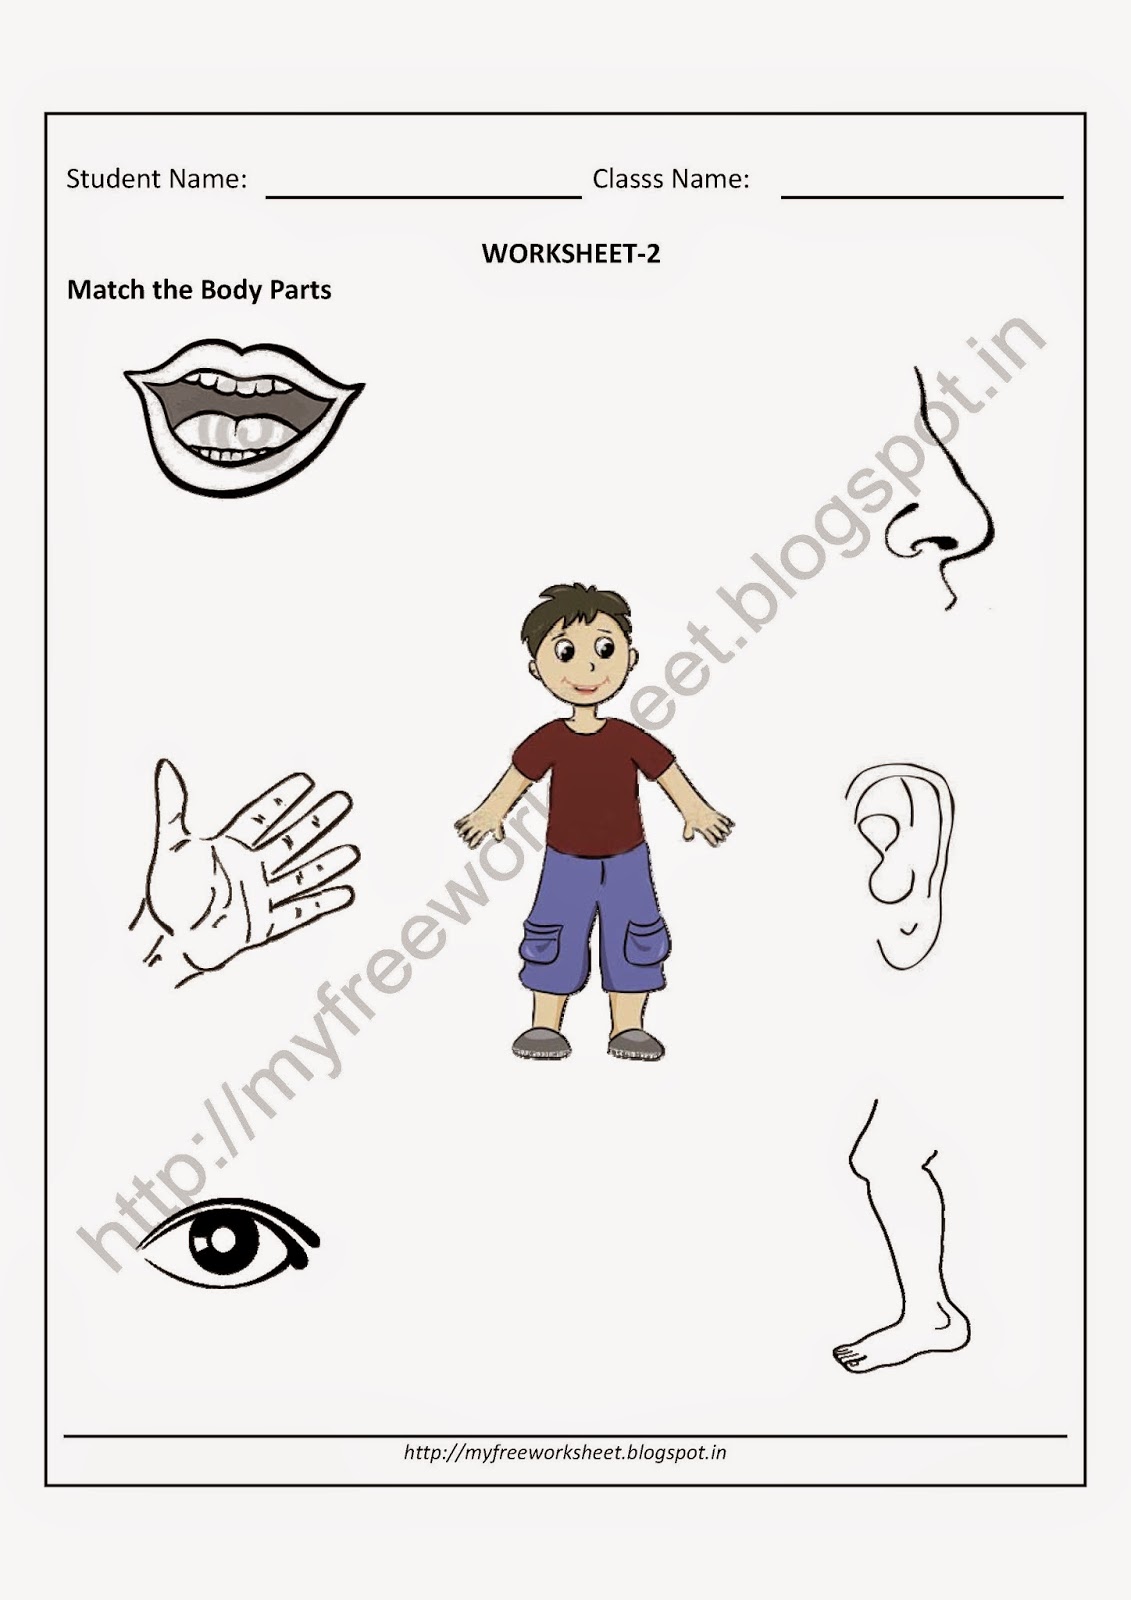 my free worksheet download pdf free for nursery kids match the body parts worksheet 2